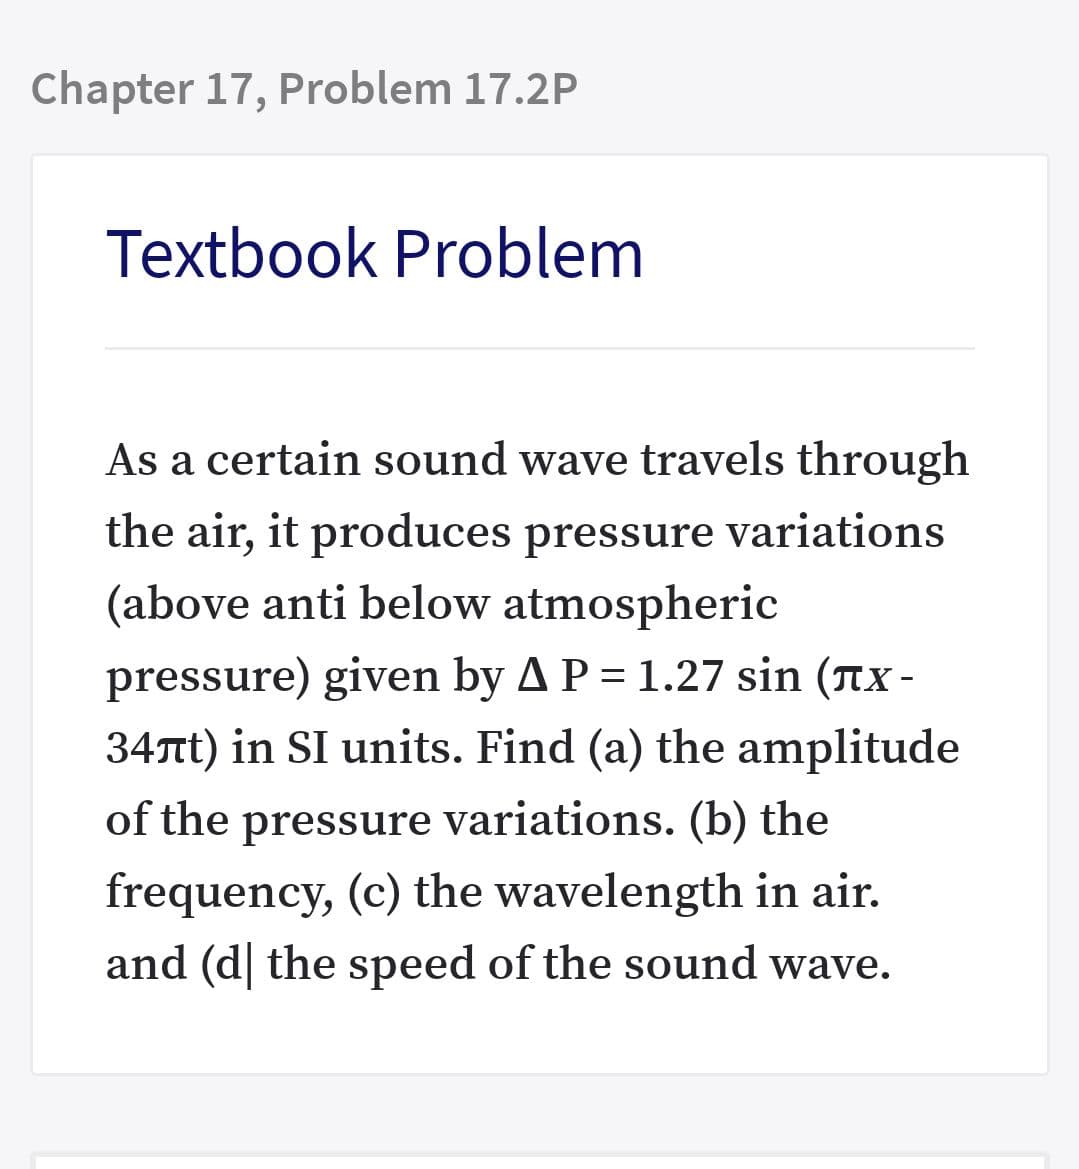 Chapter 17, Problem 17.2P
Textbook Problem
As a certain sound wave travels through
the air, it produces pressure variations
(above anti below atmospheric
pressure) given by A P = 1.27 sin (nx -
34nt) in SI units. Find (a) the amplitude
of the pressure variations. (b) the
frequency, (c) the wavelength in air.
and (d| the speed of the sound wave.
